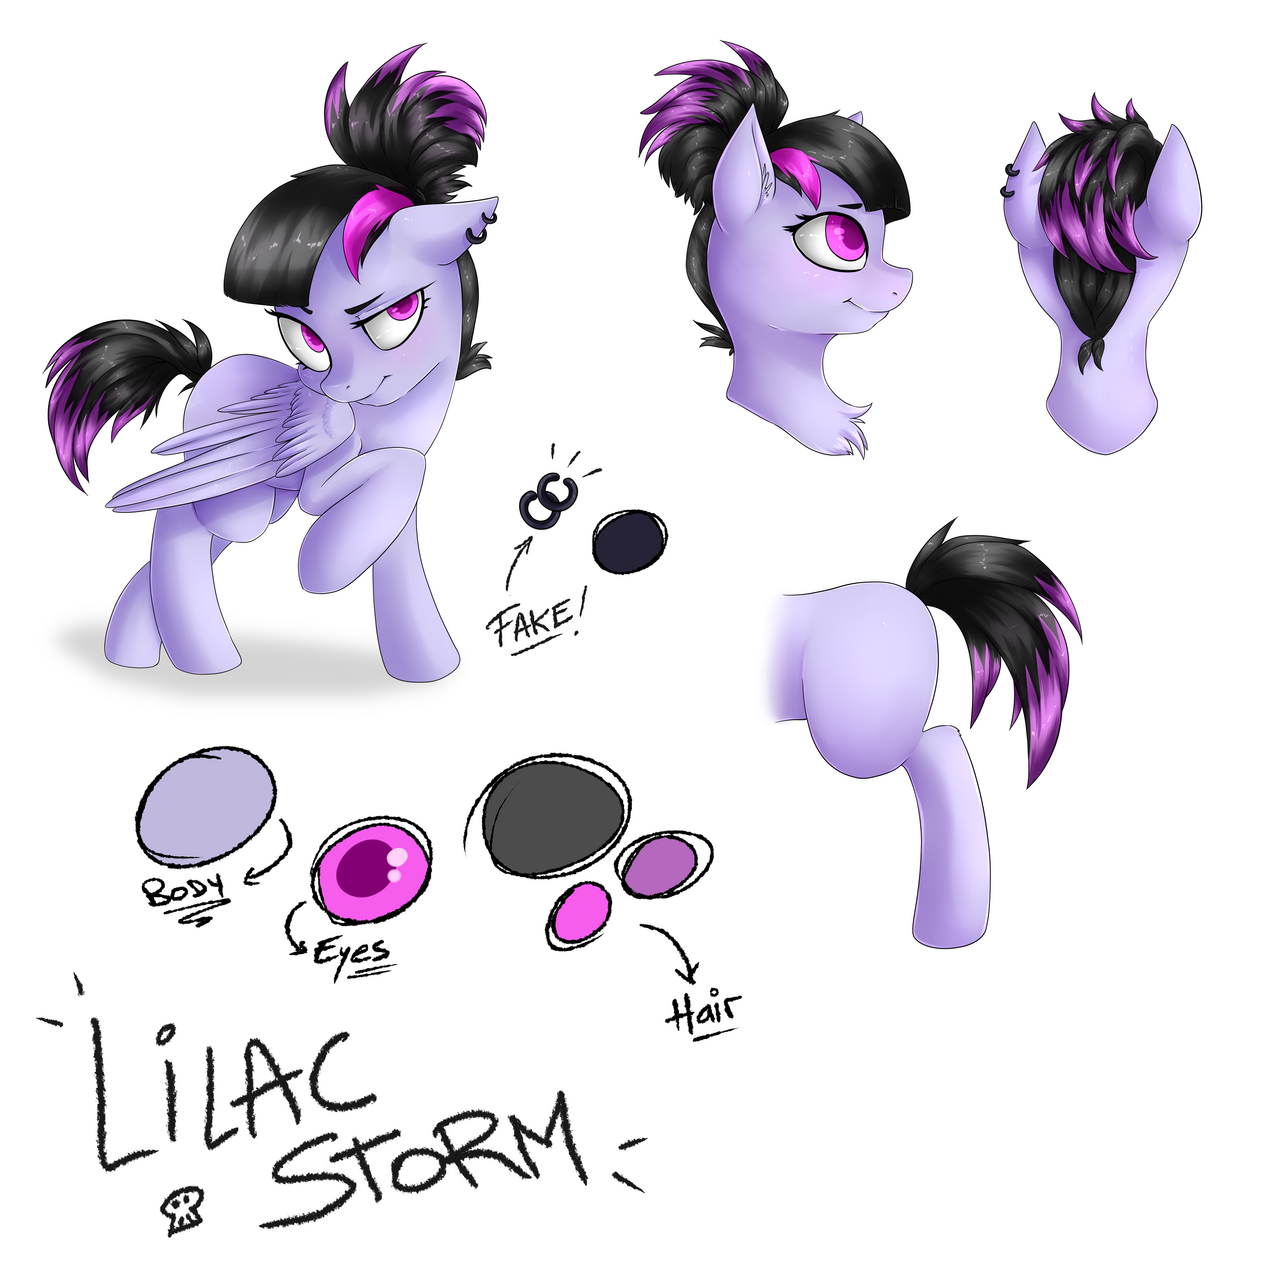 Lilac Storms reference sheet